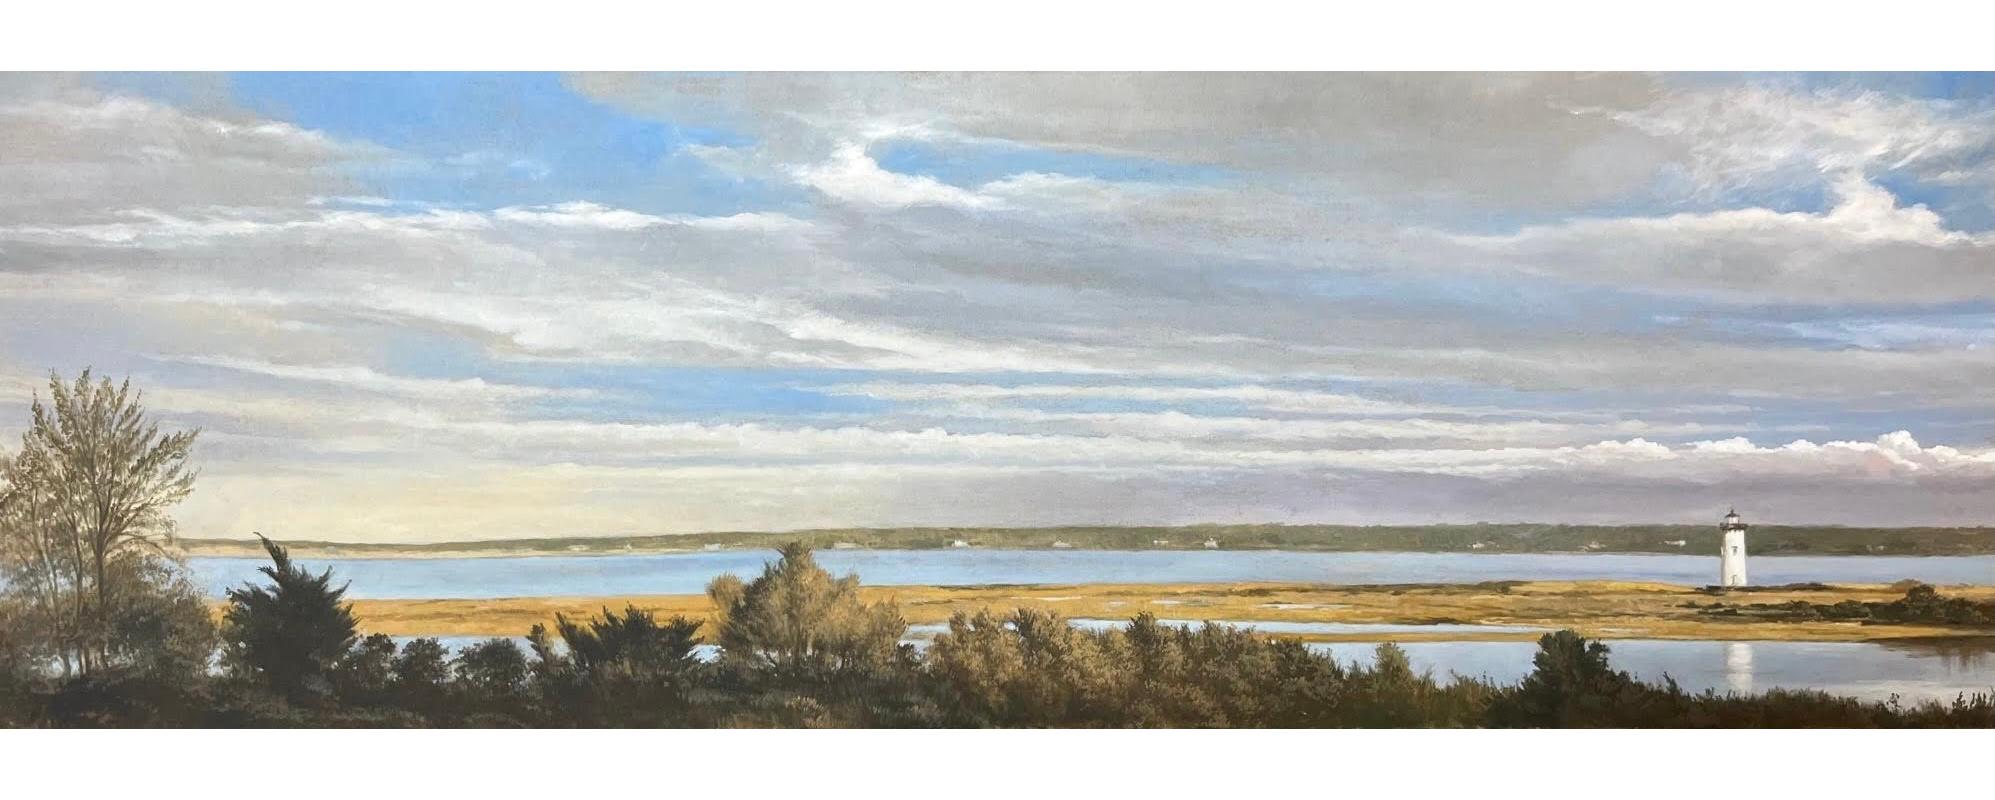 Michel Brosseau Landscape Painting - "View from the Porch" oil painting of Edgartown Harbor with lighthouse, clouds